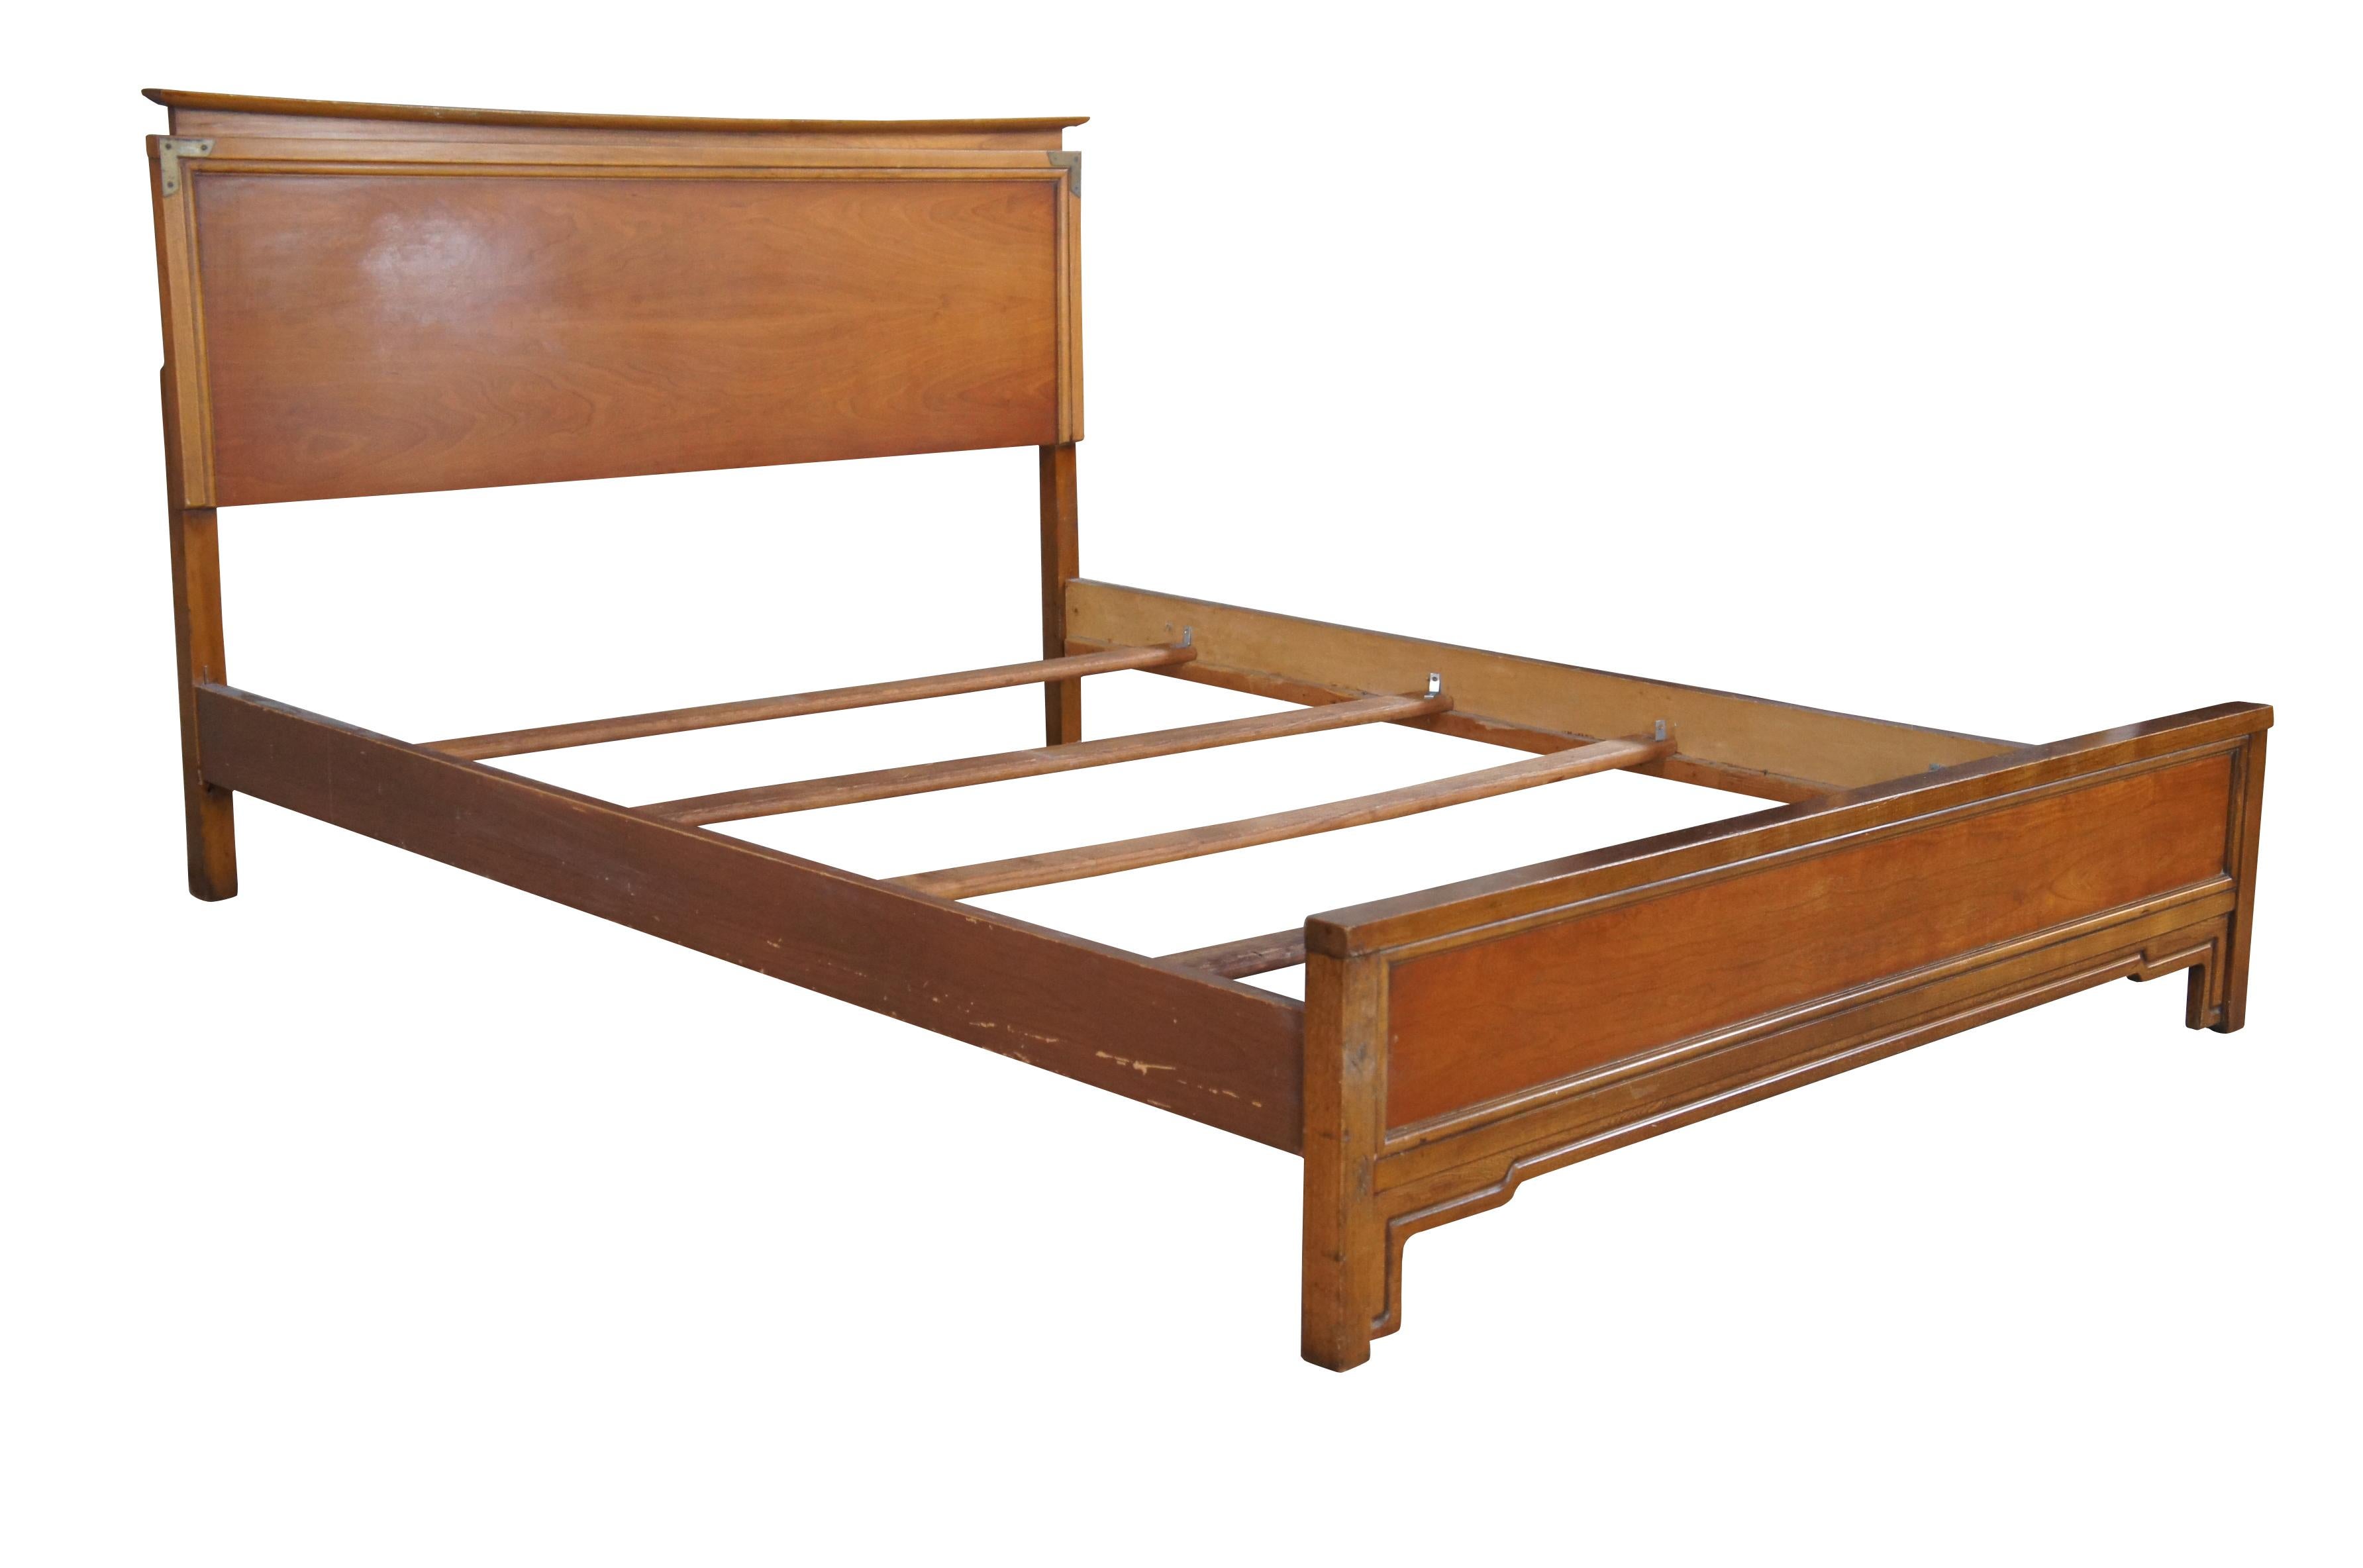 A beautiful mid century full size bed from 